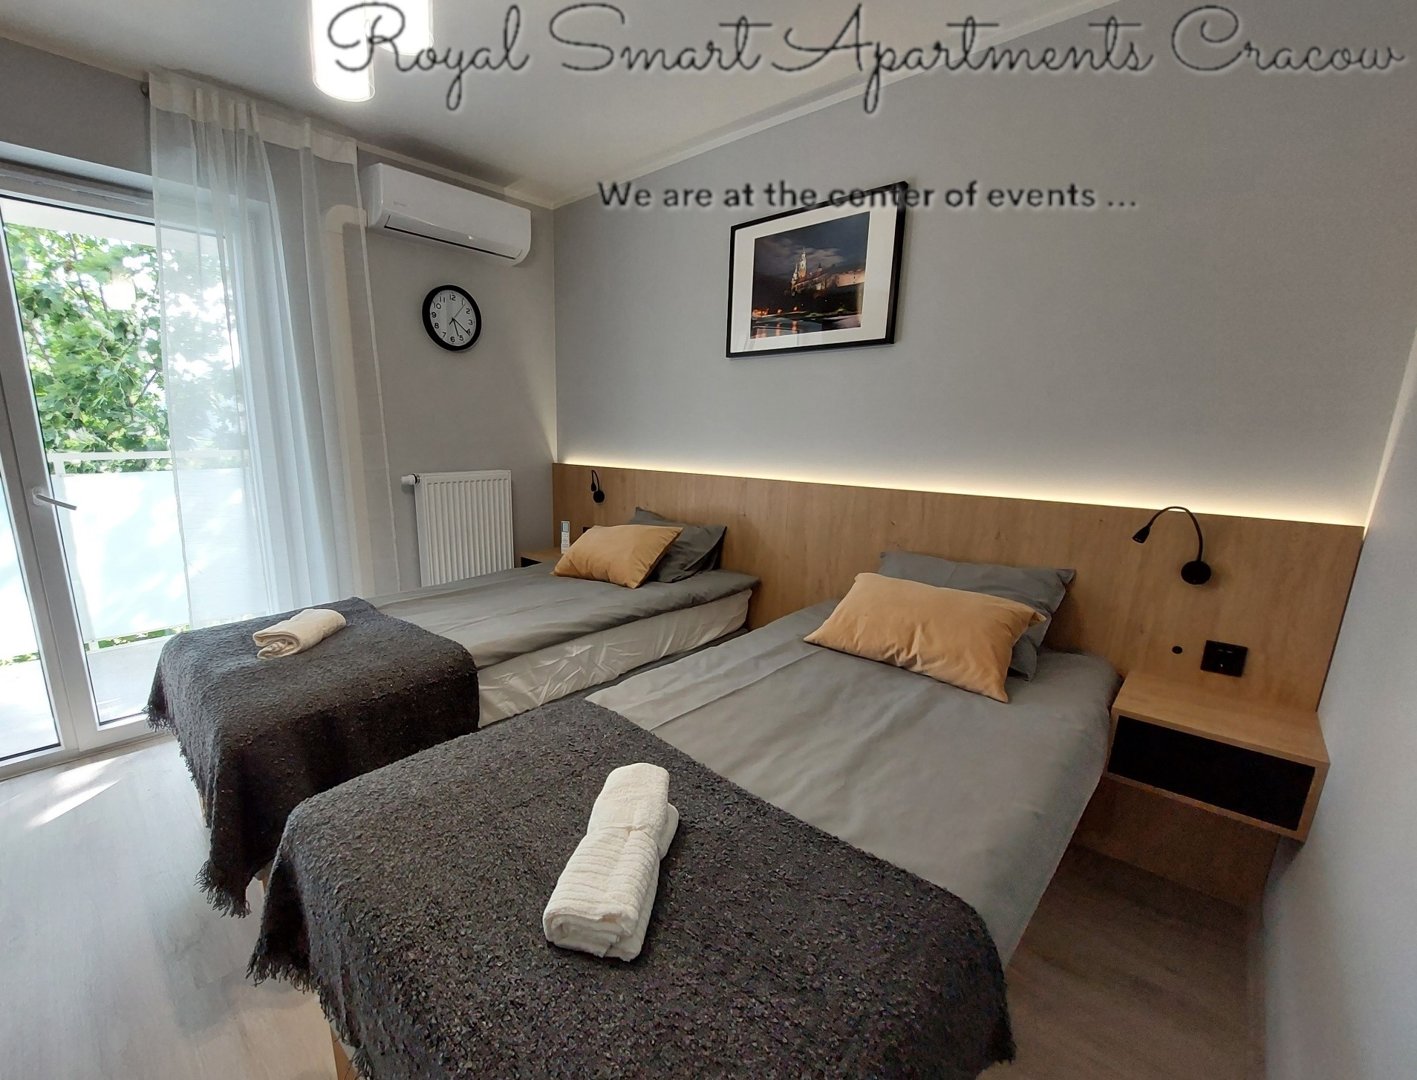 Royal Smart Apartments Cracow